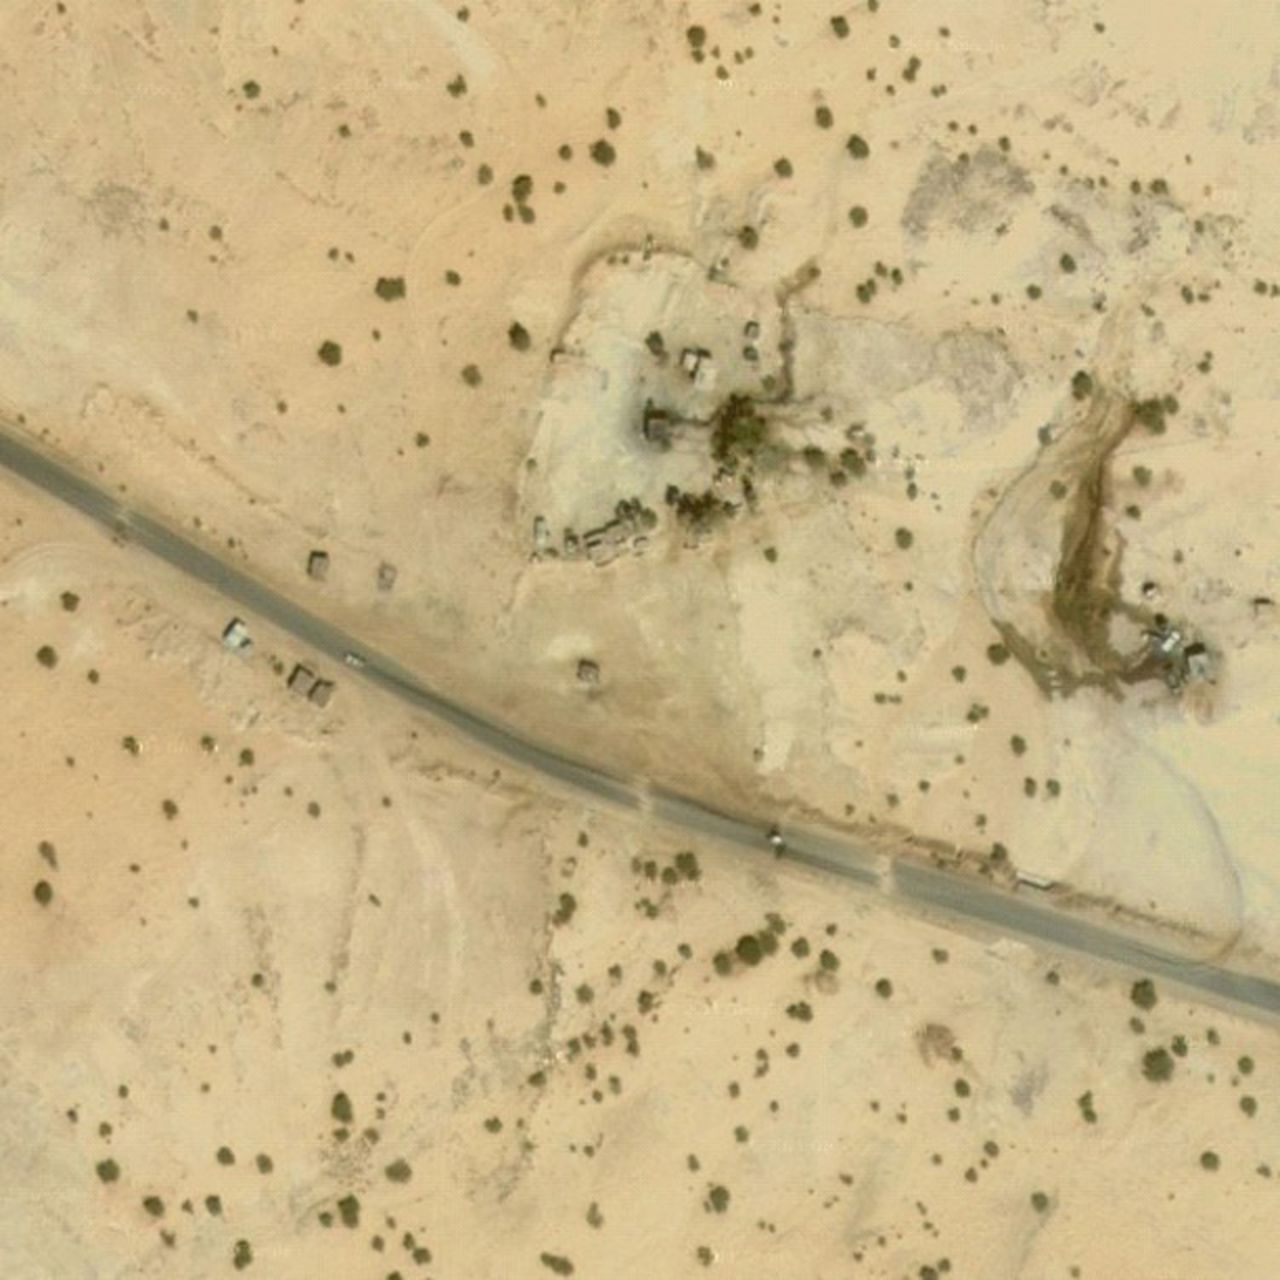 Dronestagram says this is the location of a October 28, 2012, drone strike. It is in eastern Saada, one of the poorest and most inaccessible areas of Yemen.